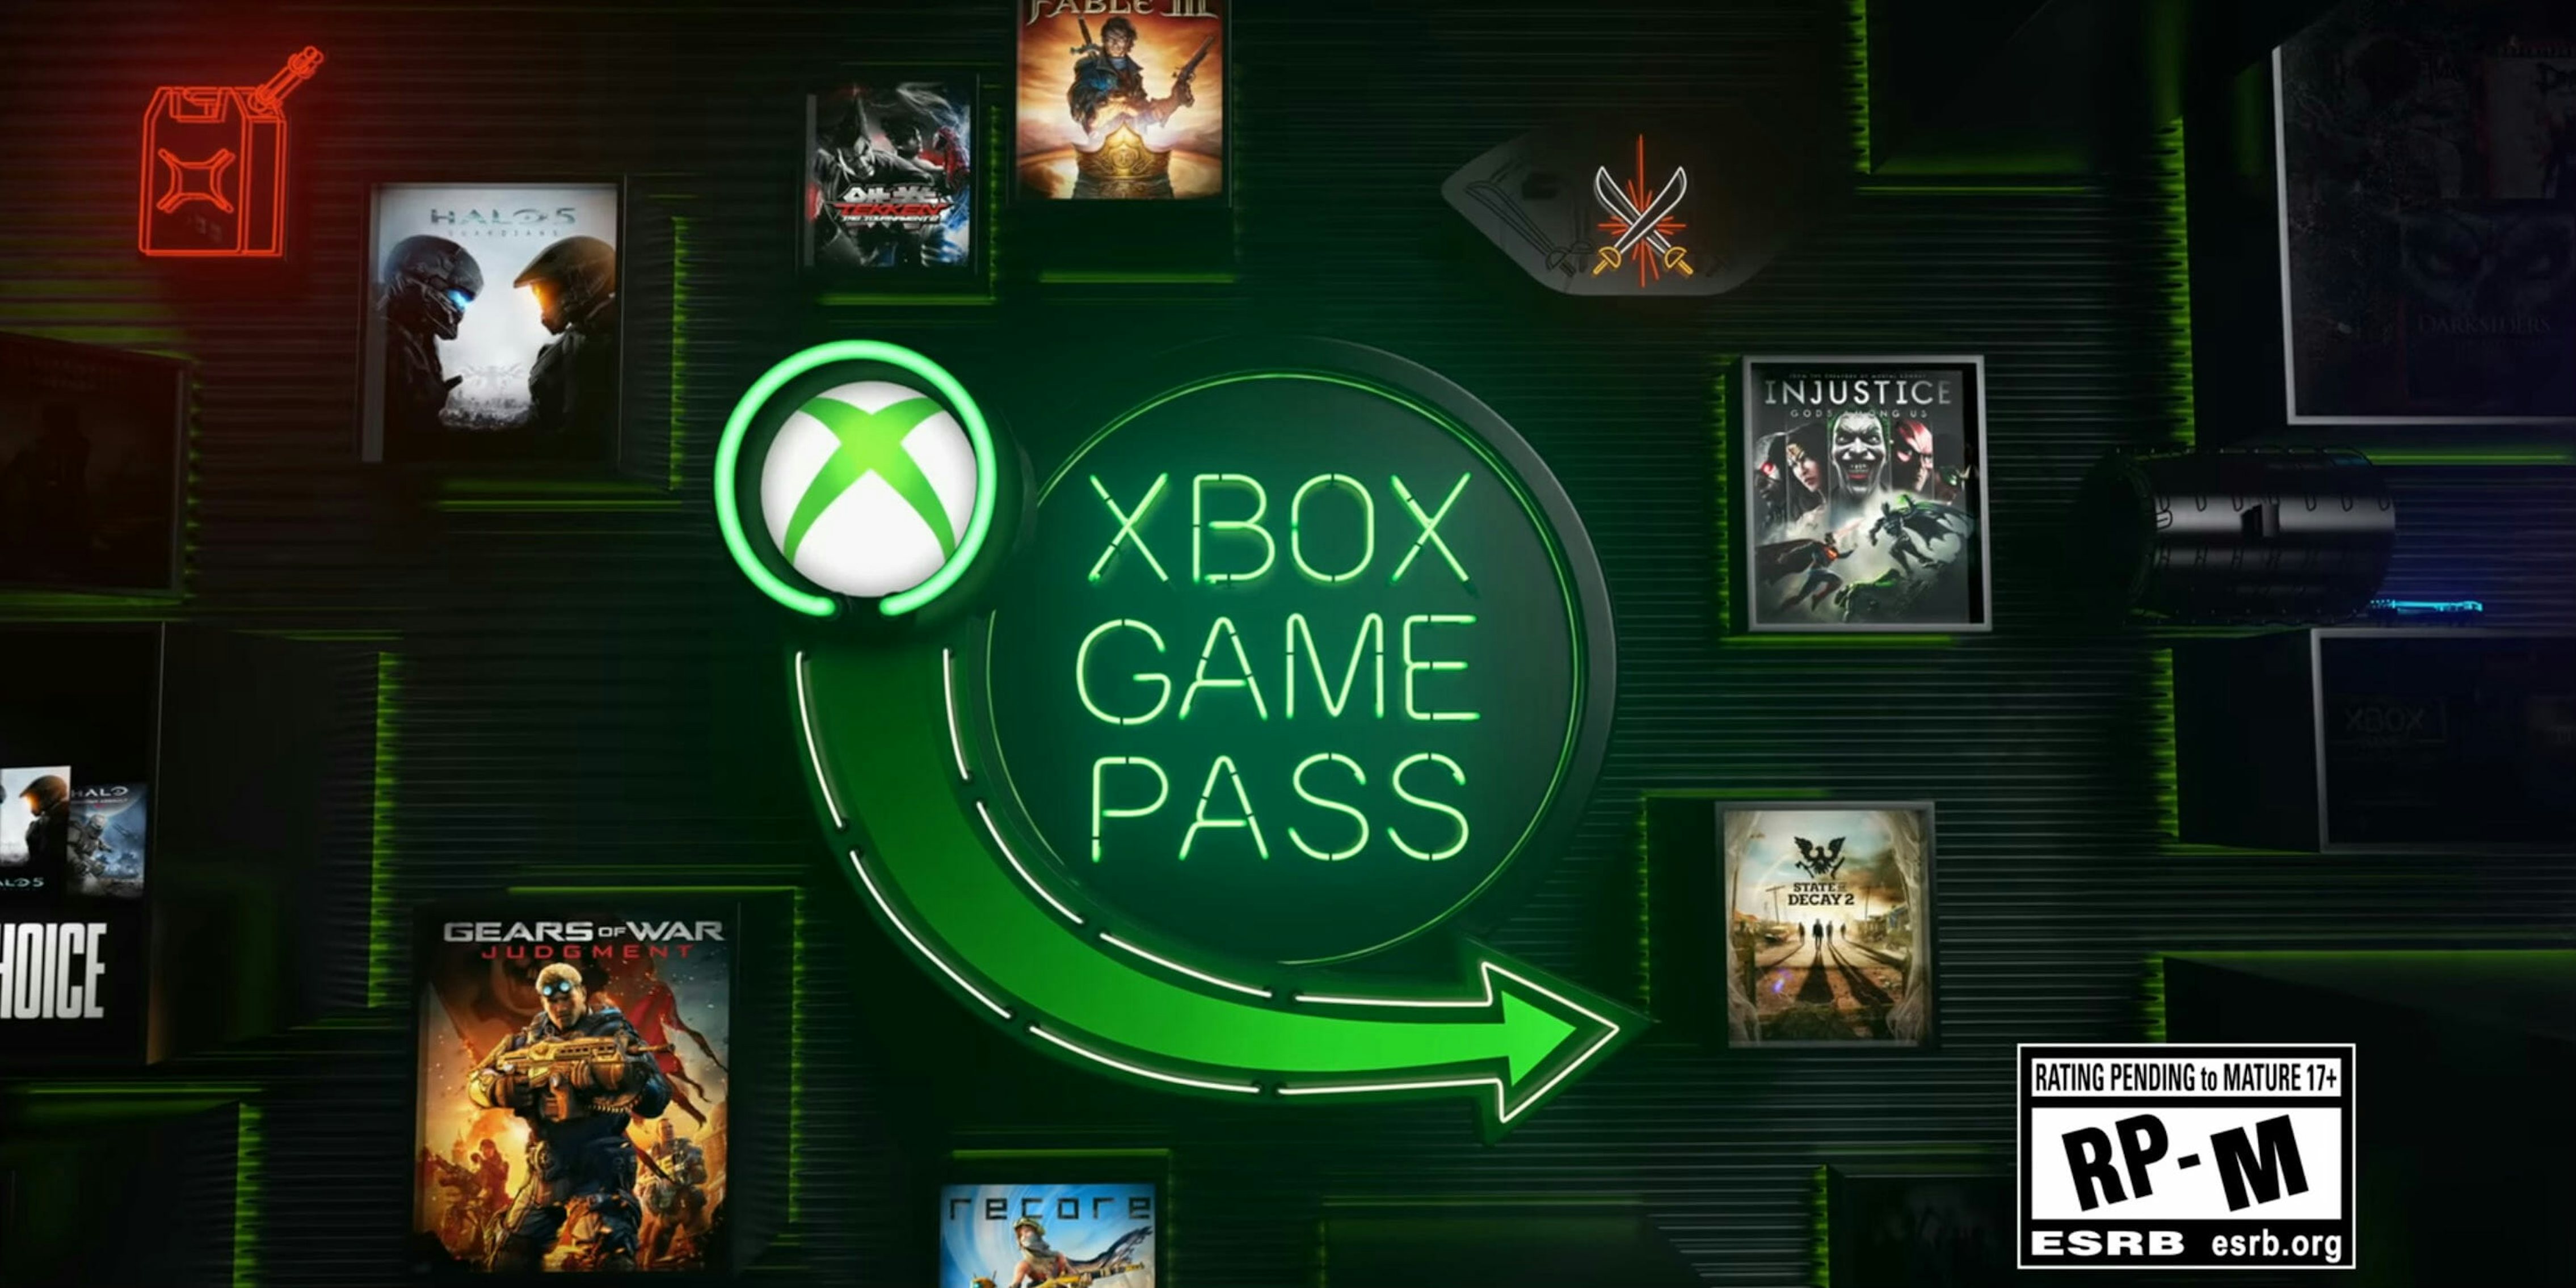 Xbox games. Game Pass. Xbox Ultimate. Xbox Pass.